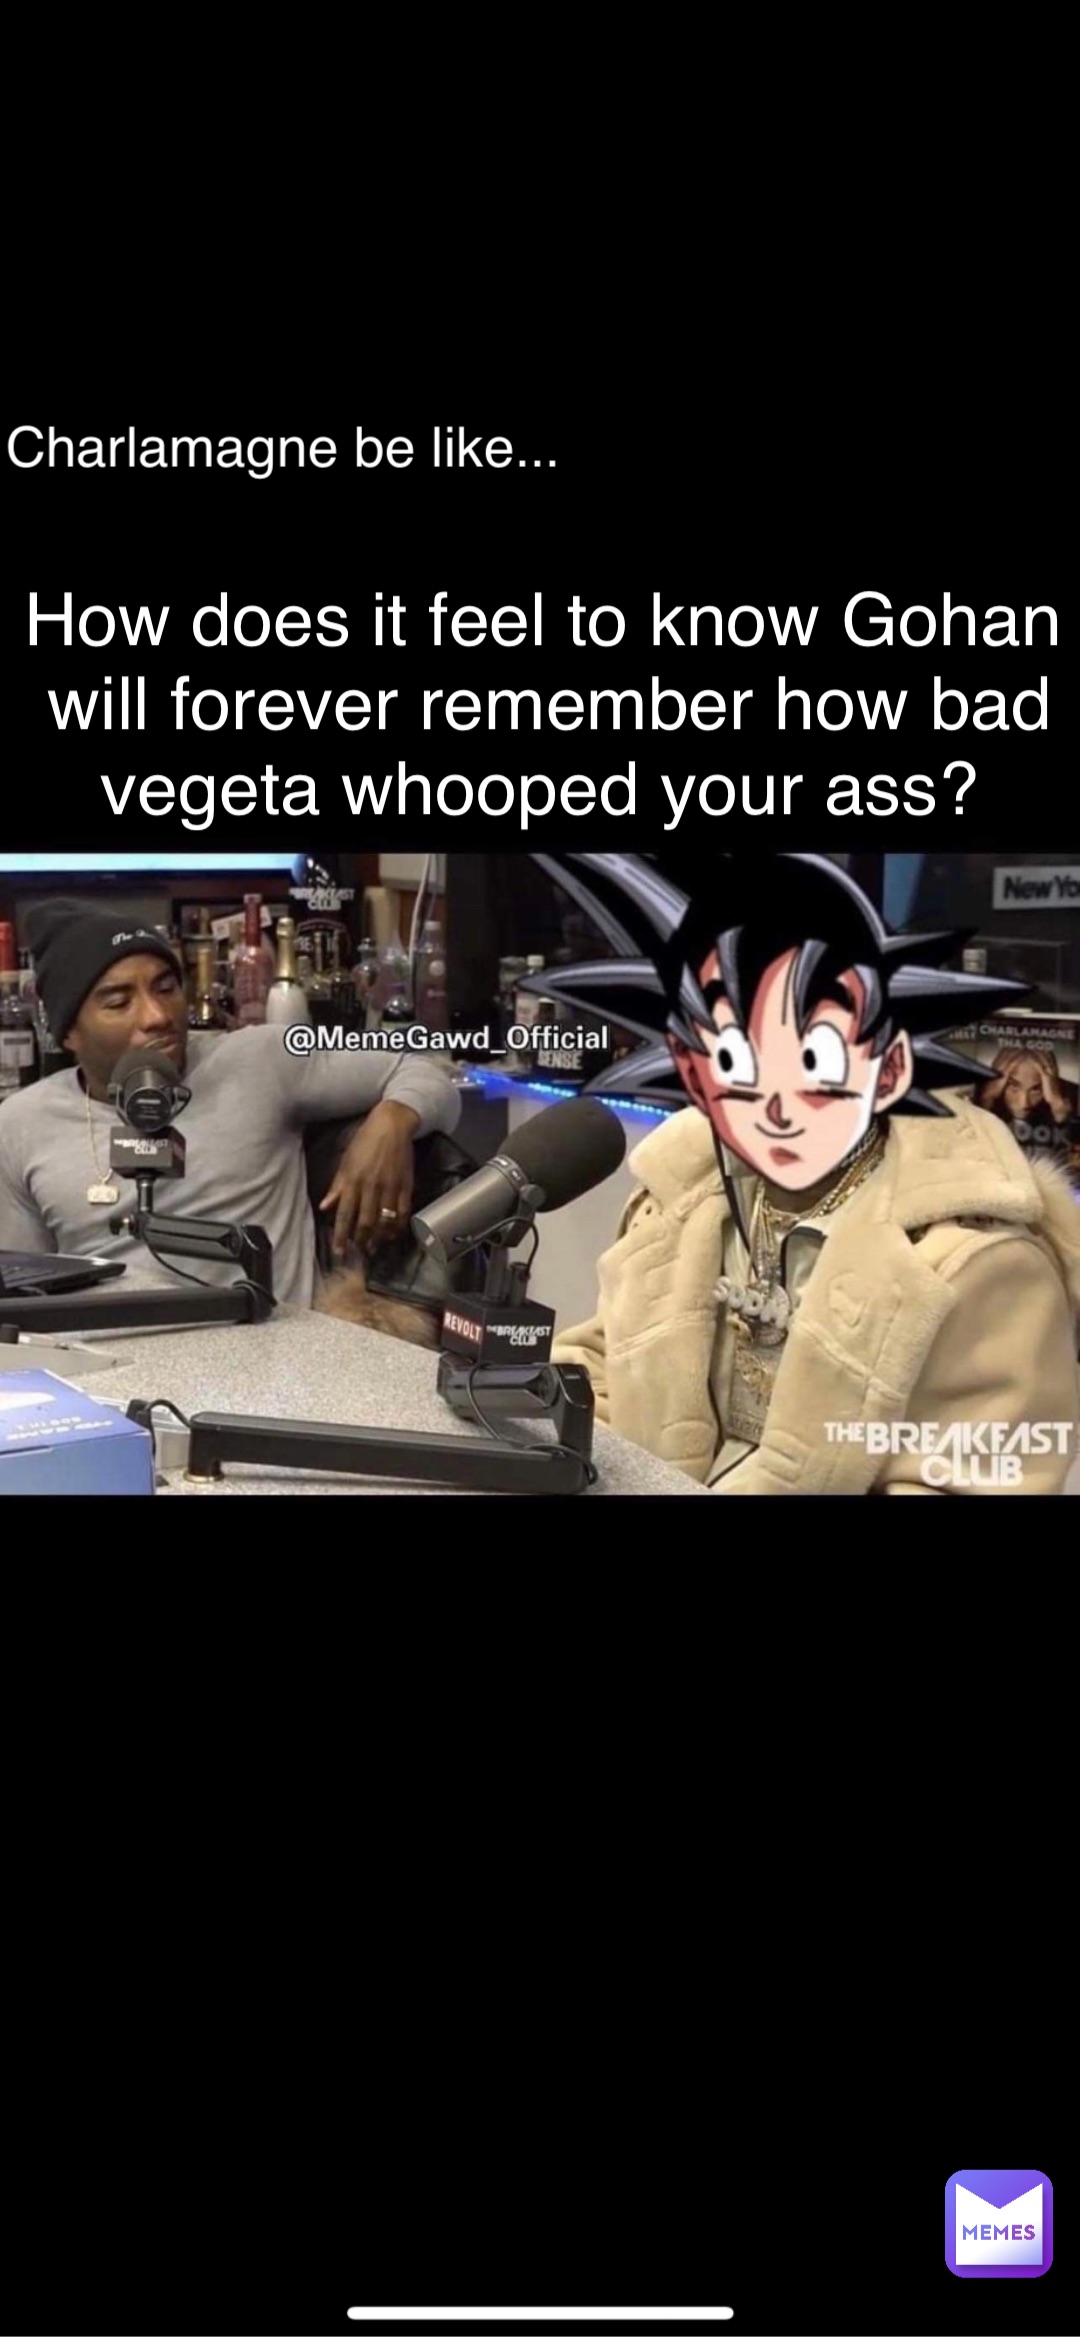 How does it feel to know Gohan will forever remember how bad vegeta whooped your ass? Charlamagne be like...